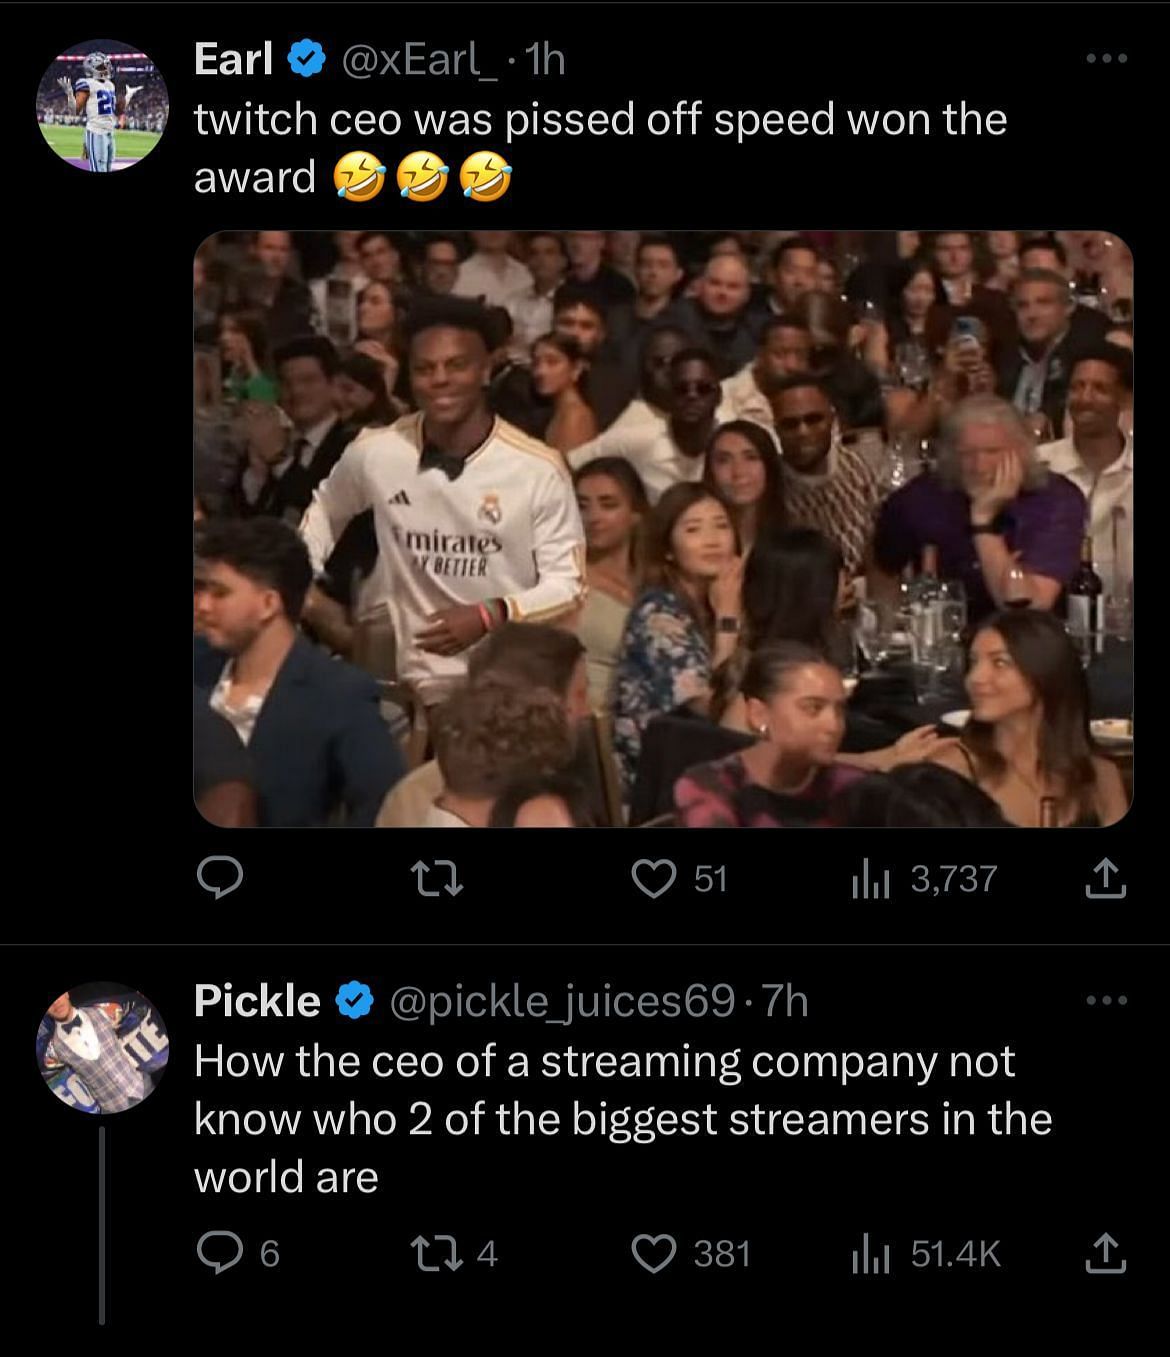 IShowSpeed really got on his knees to ask the CEO of Twitch to unban